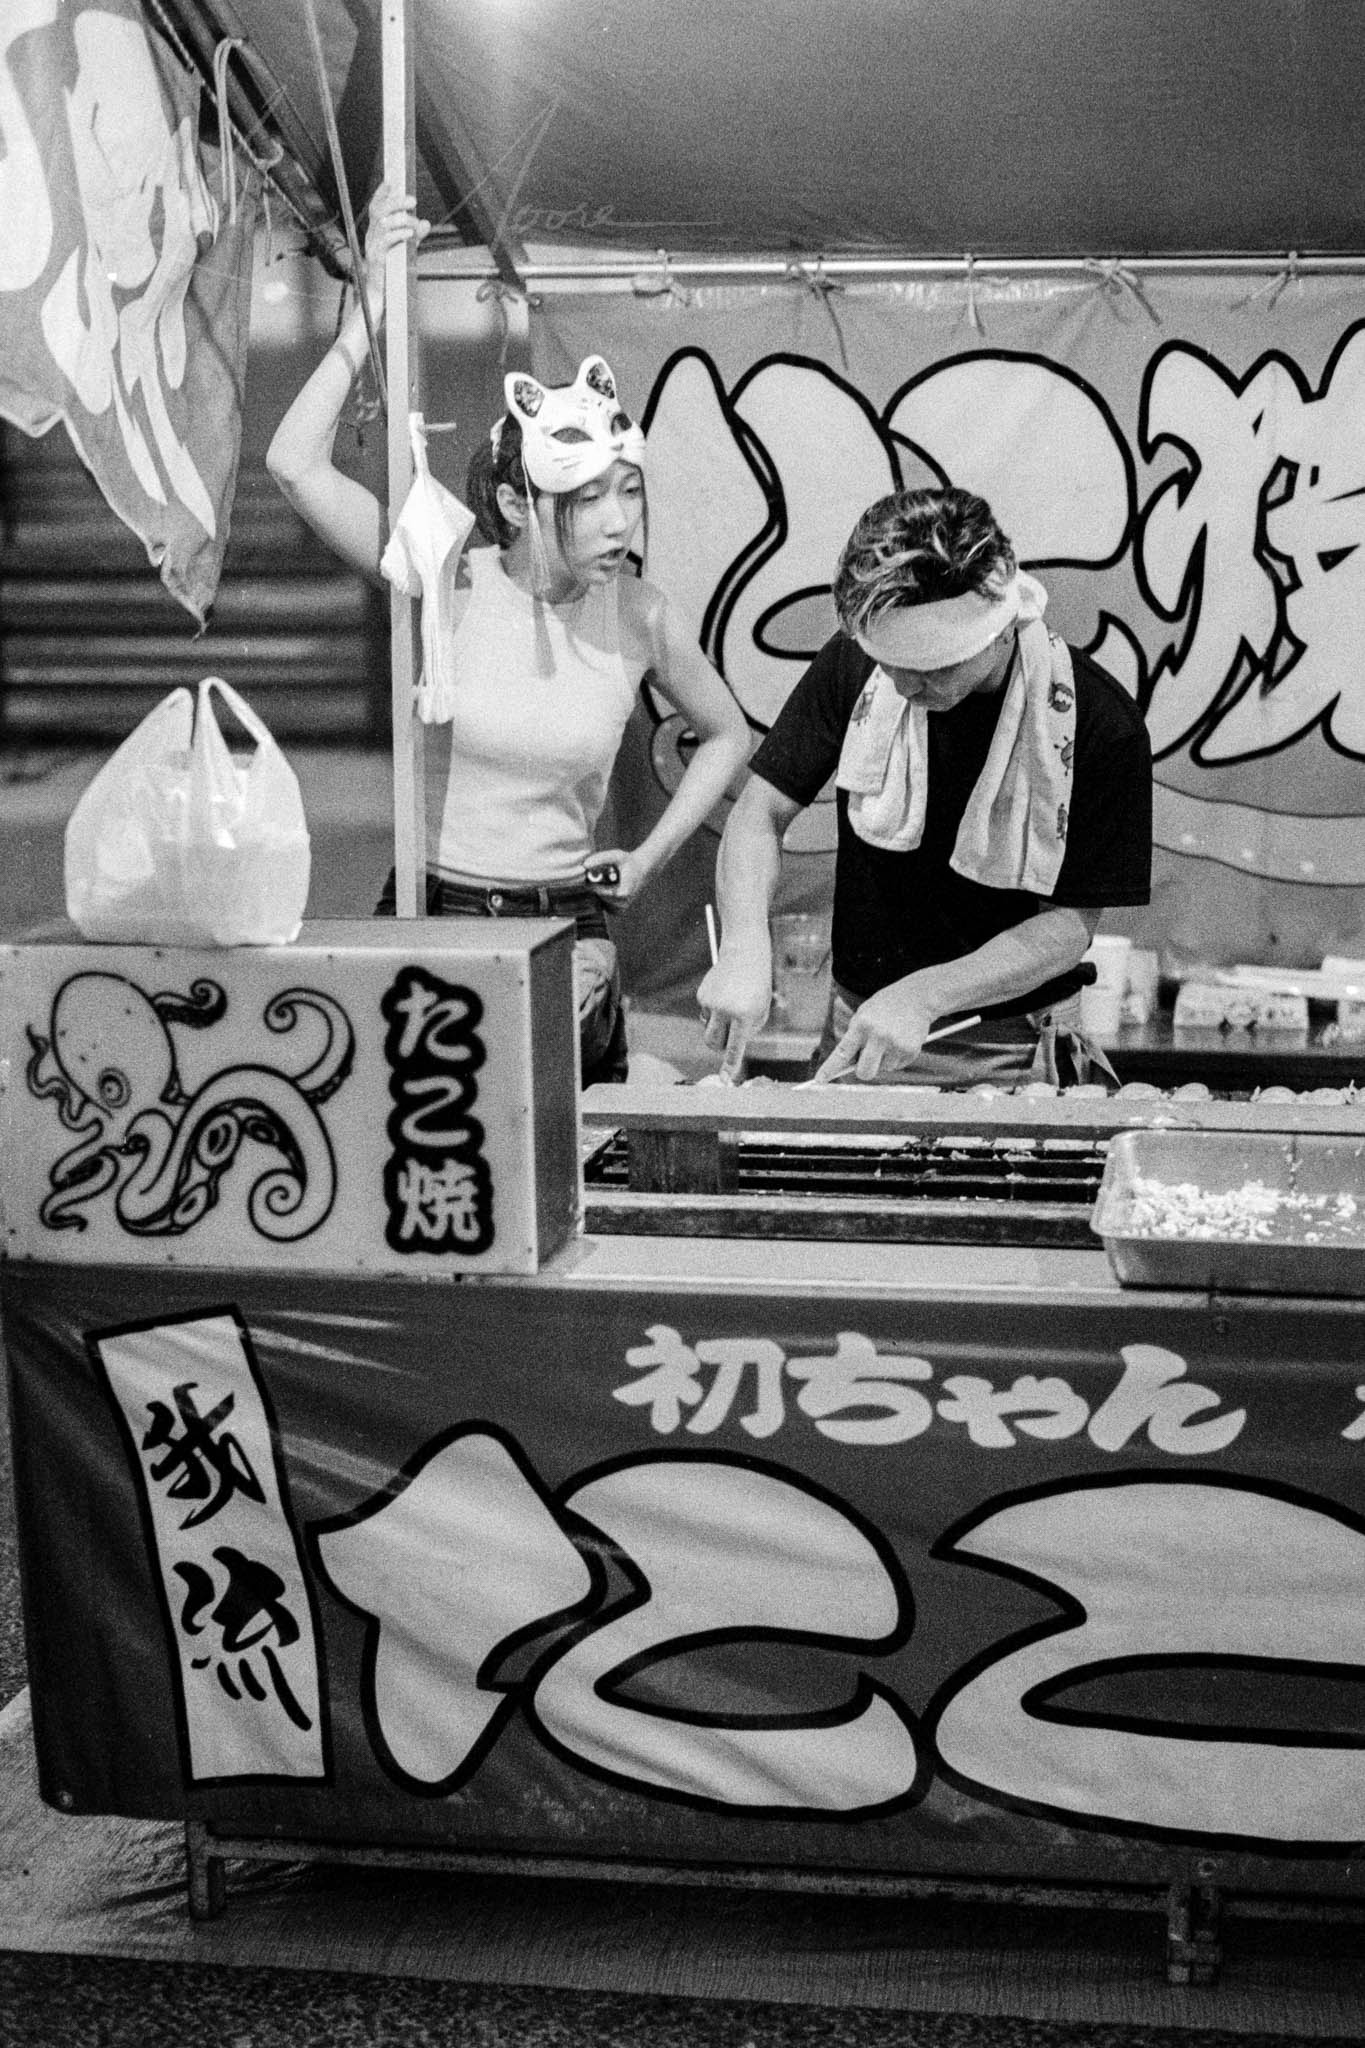 Vintage photo of Japanese festival featuring traditional fox mask and food stall.